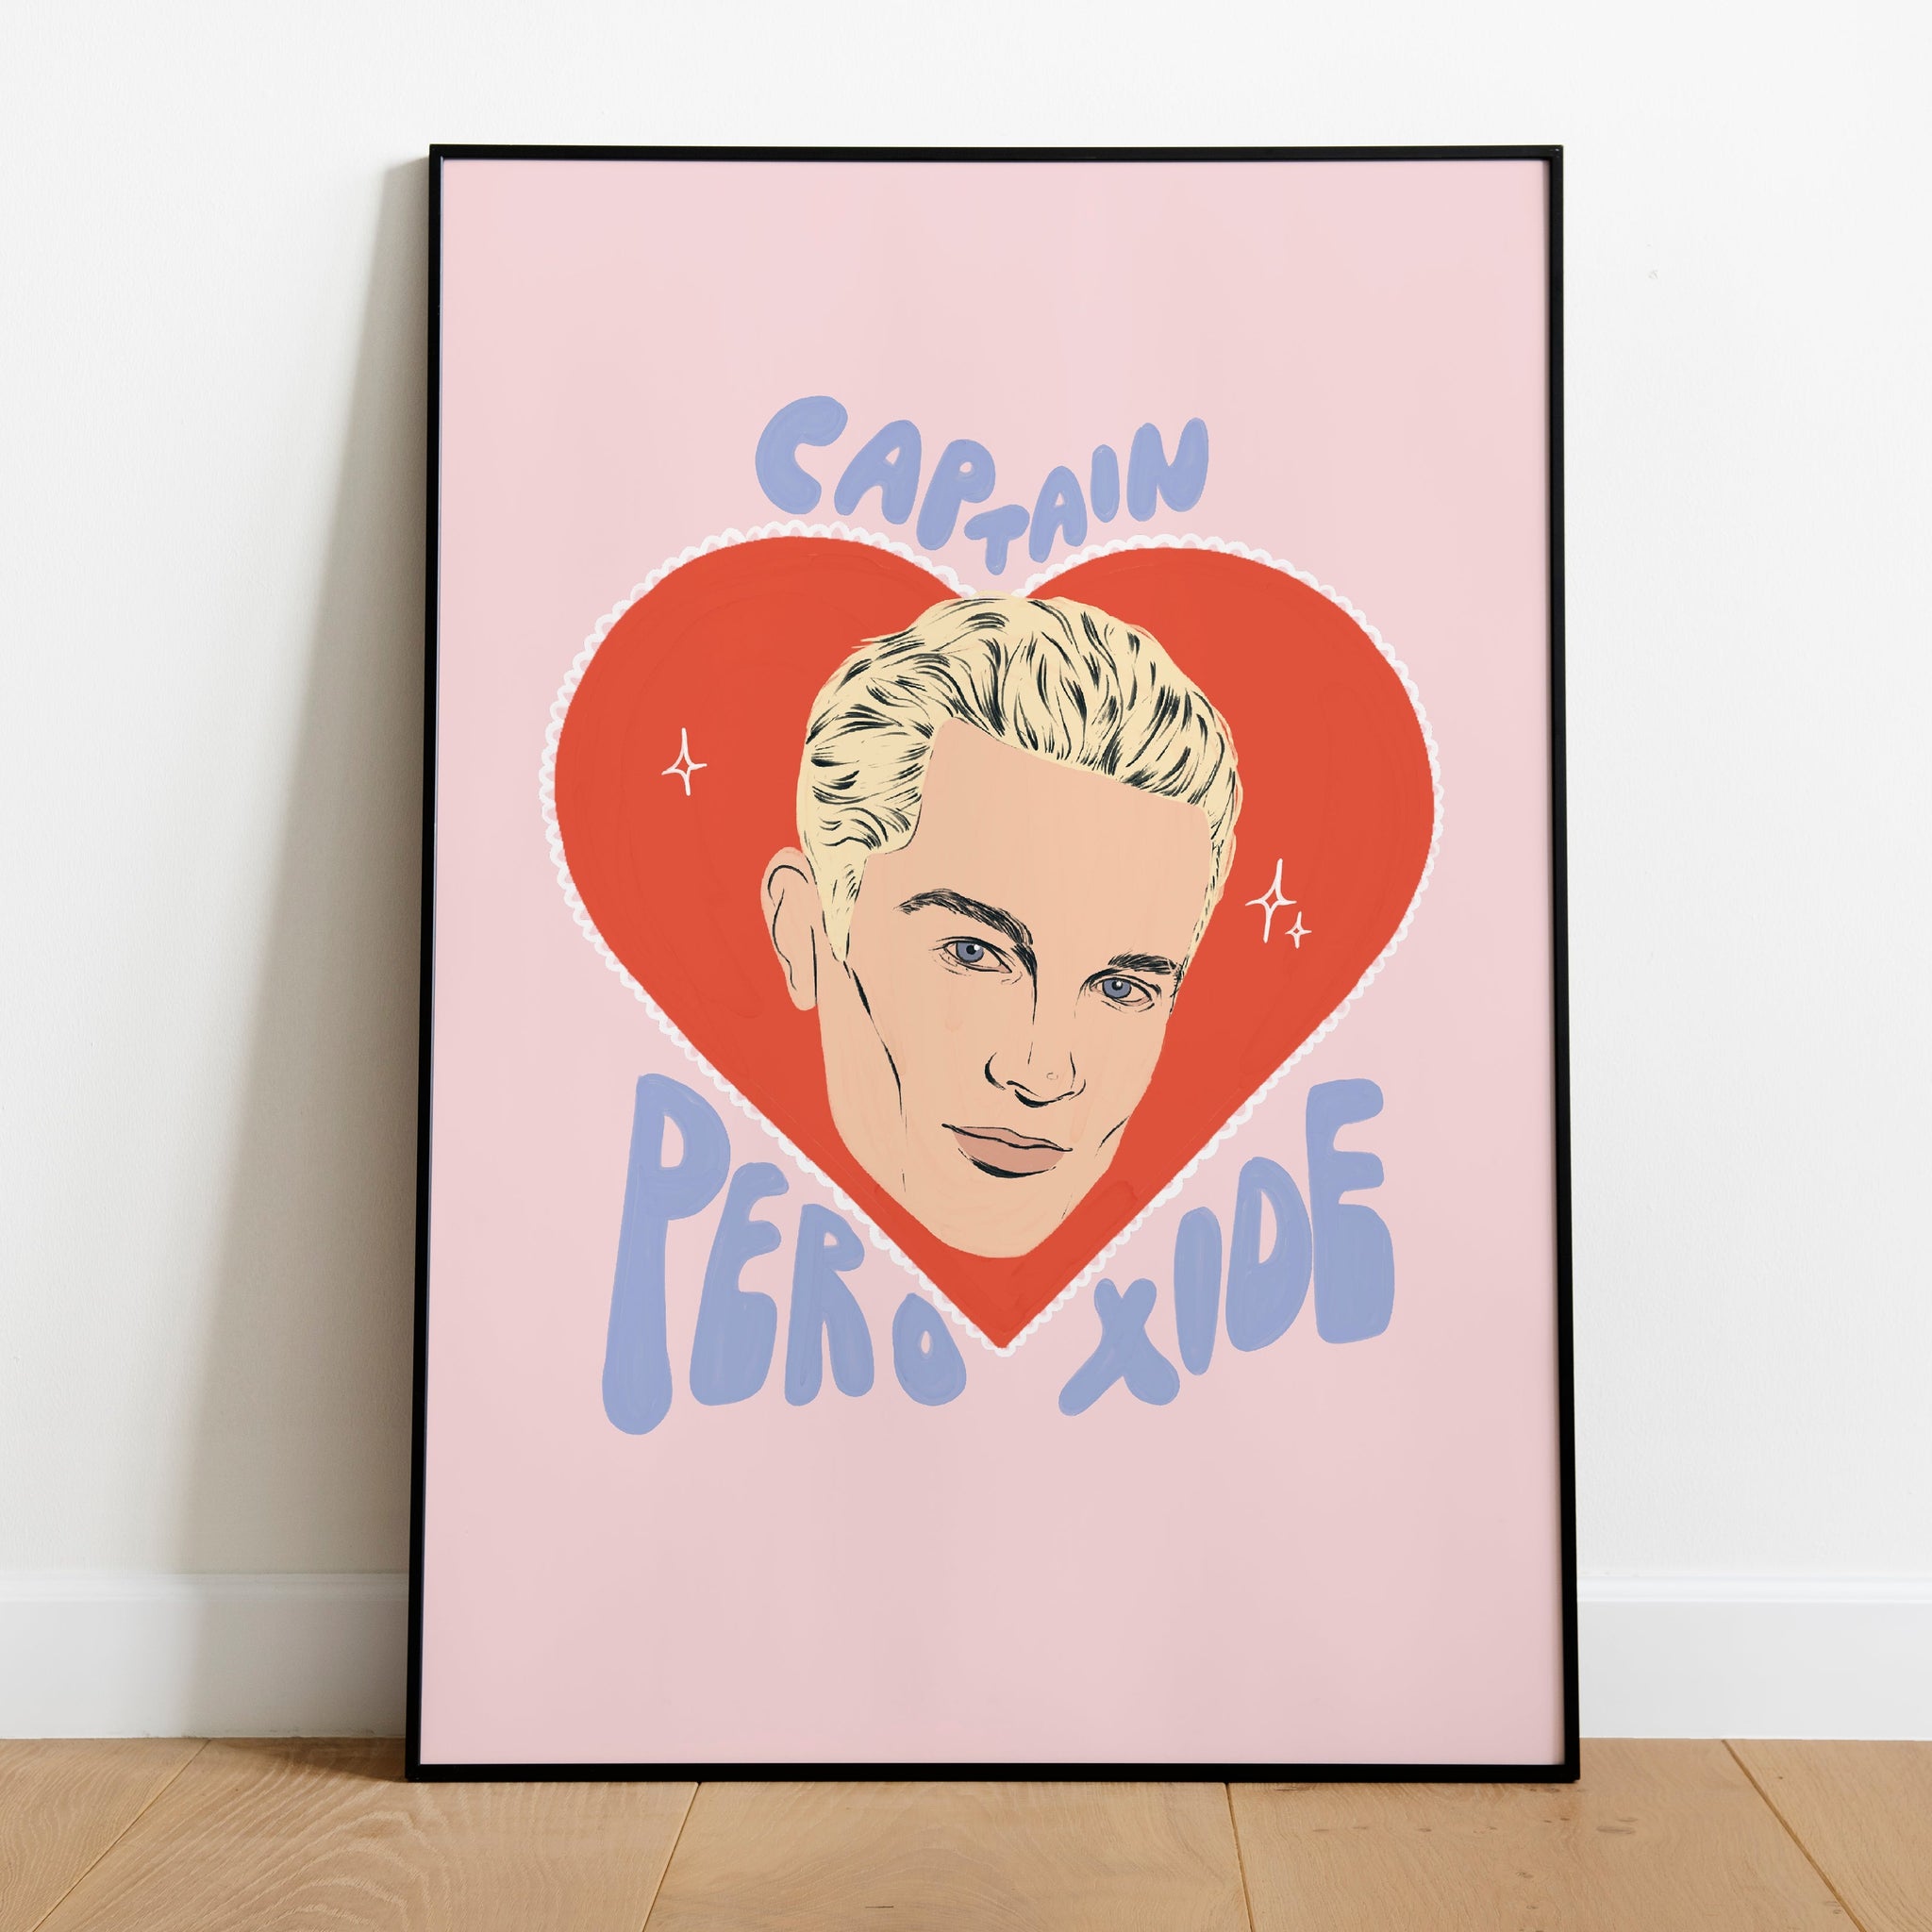 an image an art print inspired by spike from Buffy the Vampire Slayer. It features an illustration of Spike on background of a red love heart with the words captain peroxide written around him. 